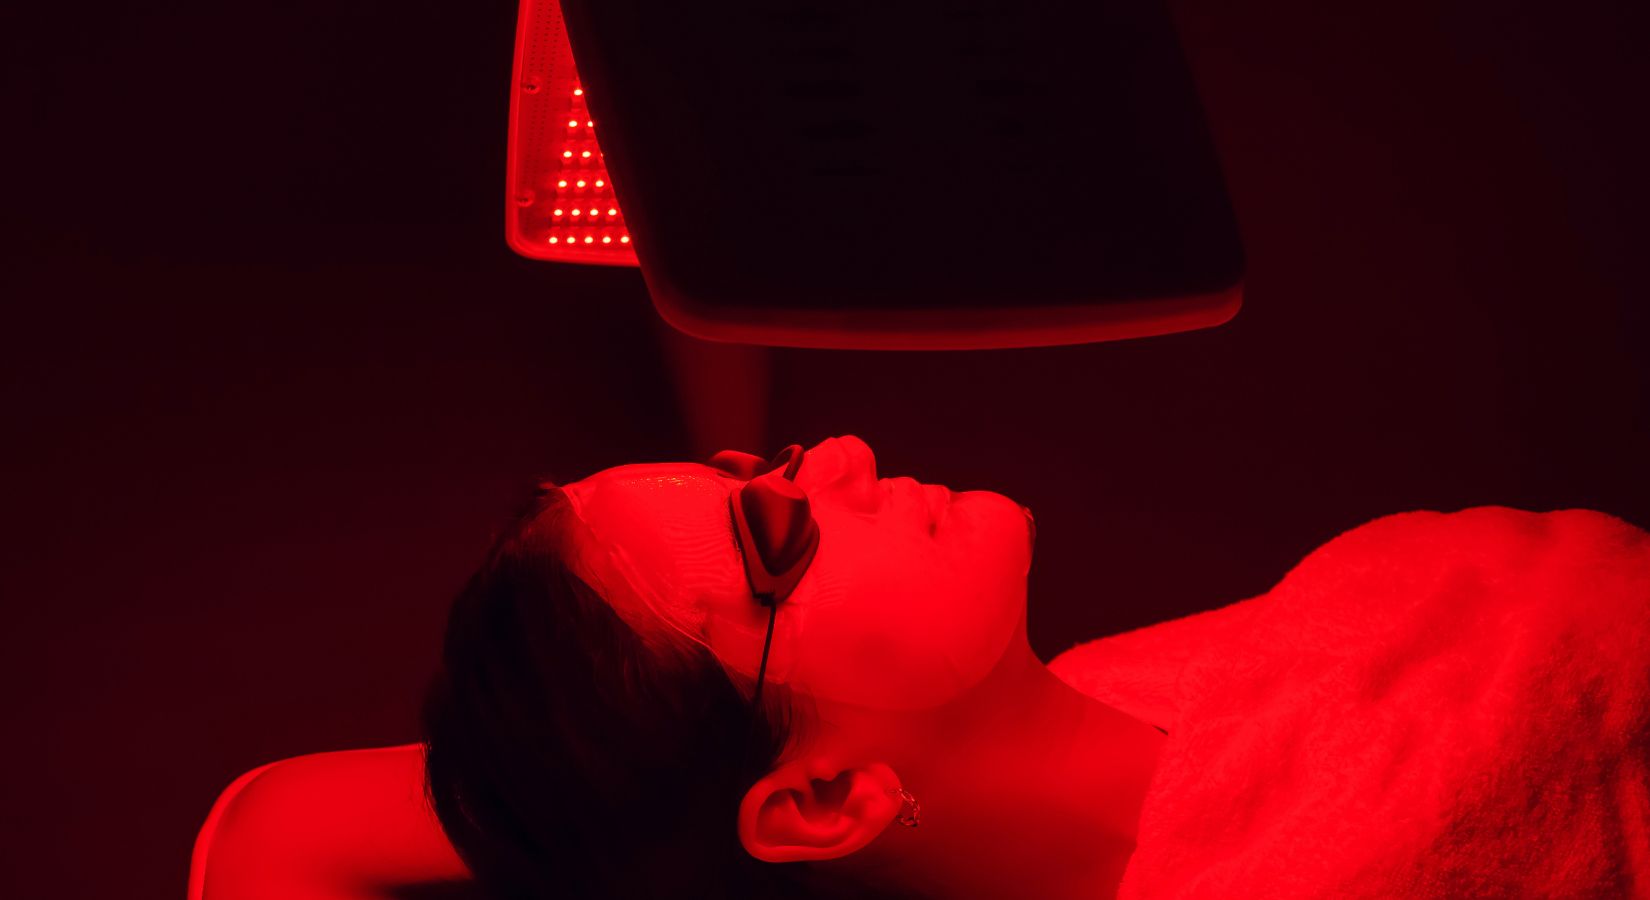 Does red light therapy work?